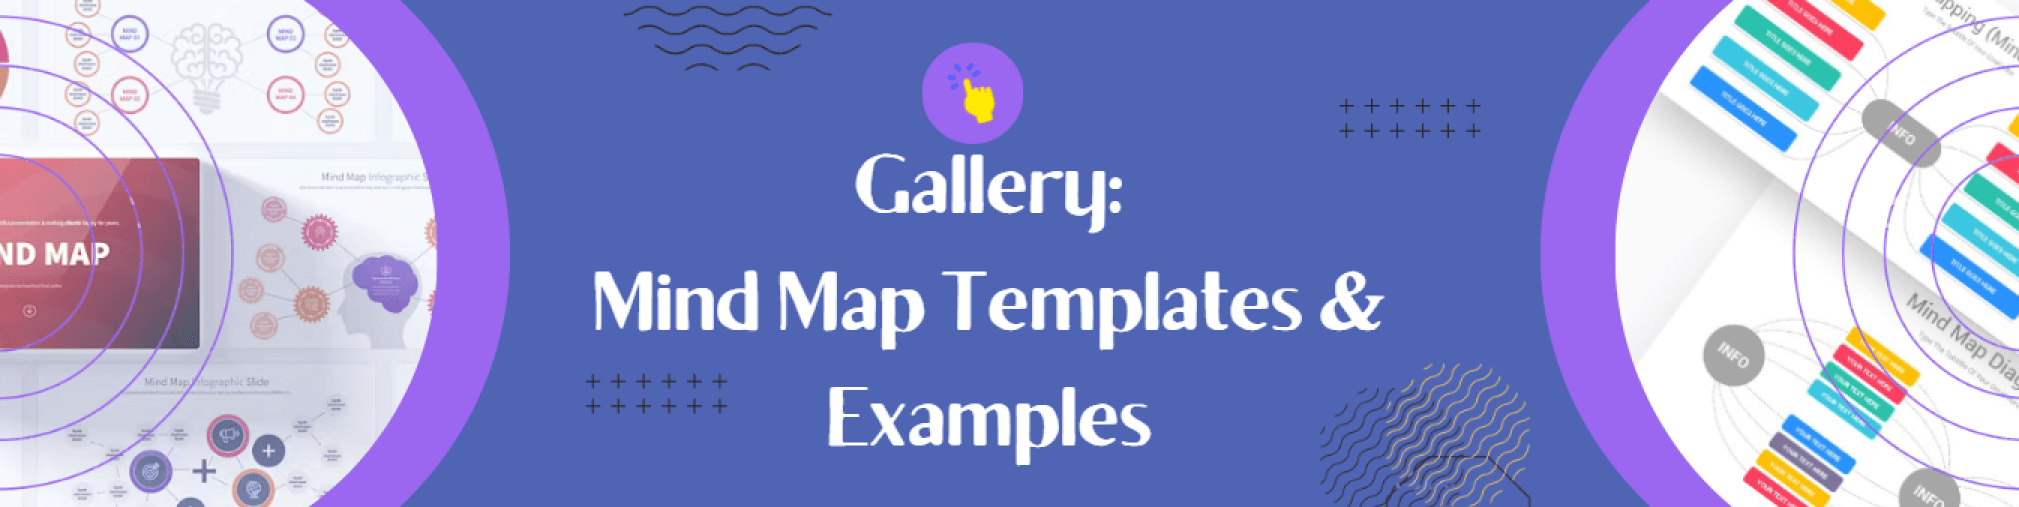 mind map templates & examples